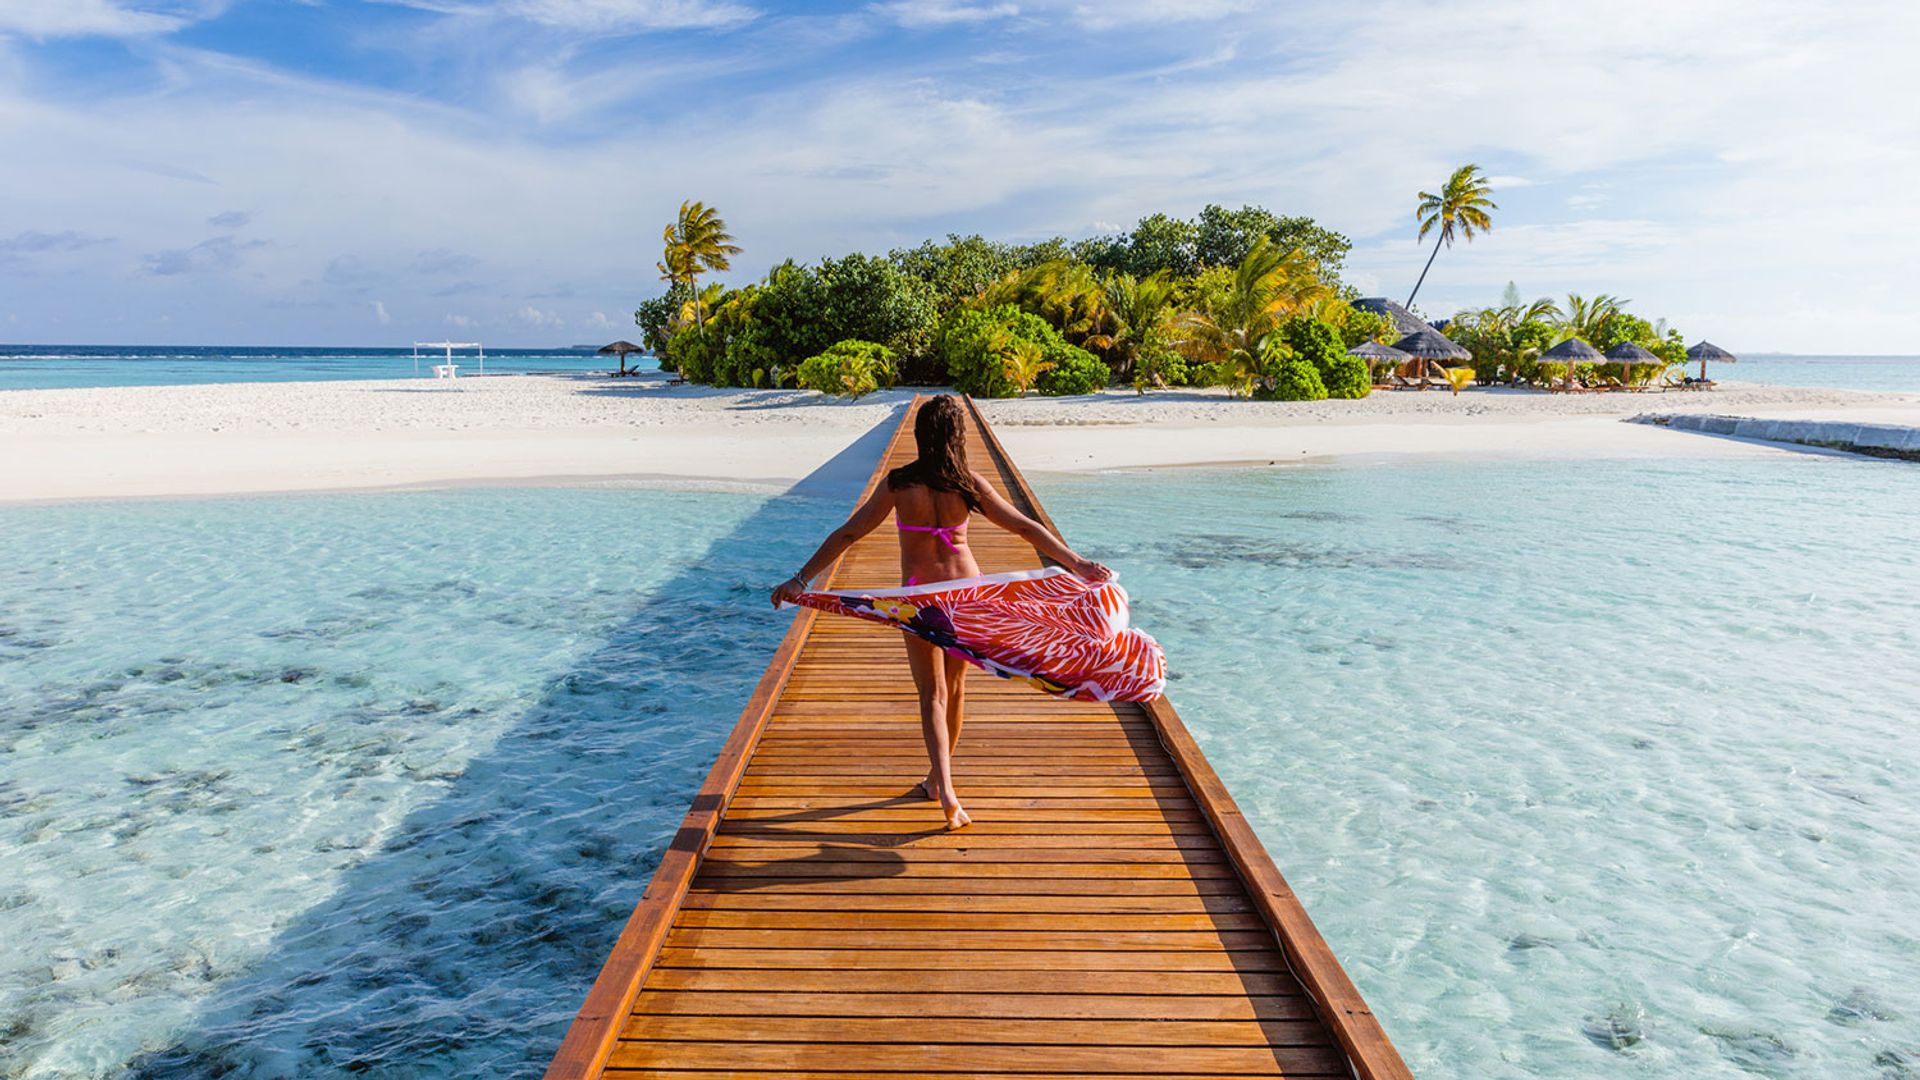 Woman with sarong walking on pier in the Maldives